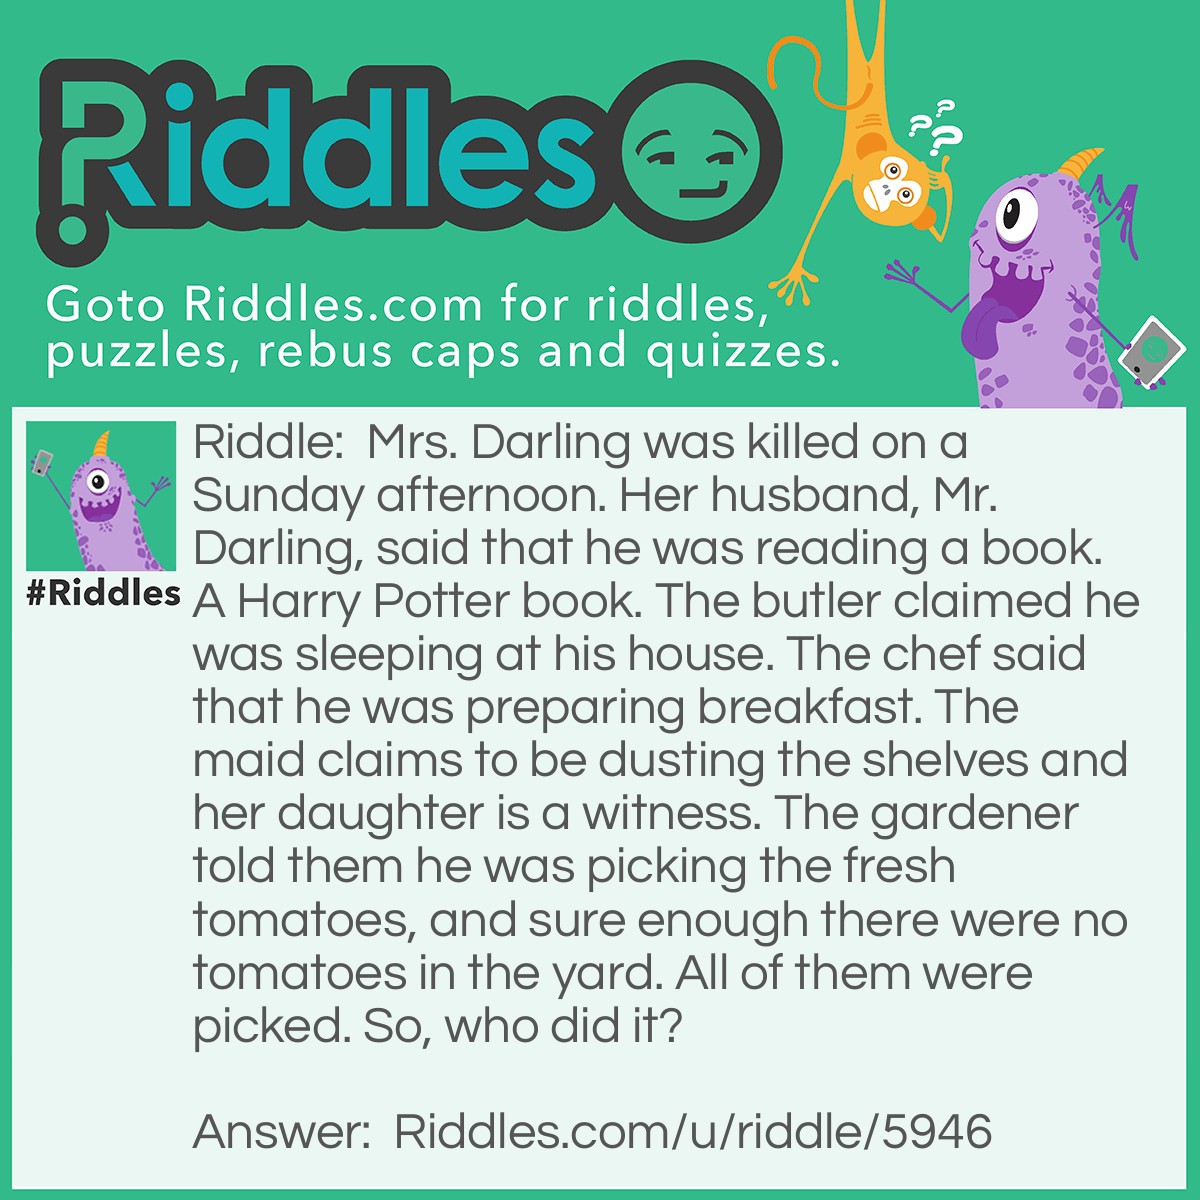 Riddle: Mrs. Darling was killed on a Sunday afternoon. Her husband, Mr. Darling, said that he was reading a book. A Harry Potter book. The butler claimed he was sleeping at his house. The chef said that he was preparing breakfast. The maid claims to be dusting the shelves and her daughter is a witness. The gardener told them he was picking the fresh tomatoes, and sure enough there were no tomatoes in the yard. All of them were picked. So, who did it? Answer: The chef, because even though Mrs. Darling was killed in the AFTERNOON, the chef claimed he was making BREAKFAST.